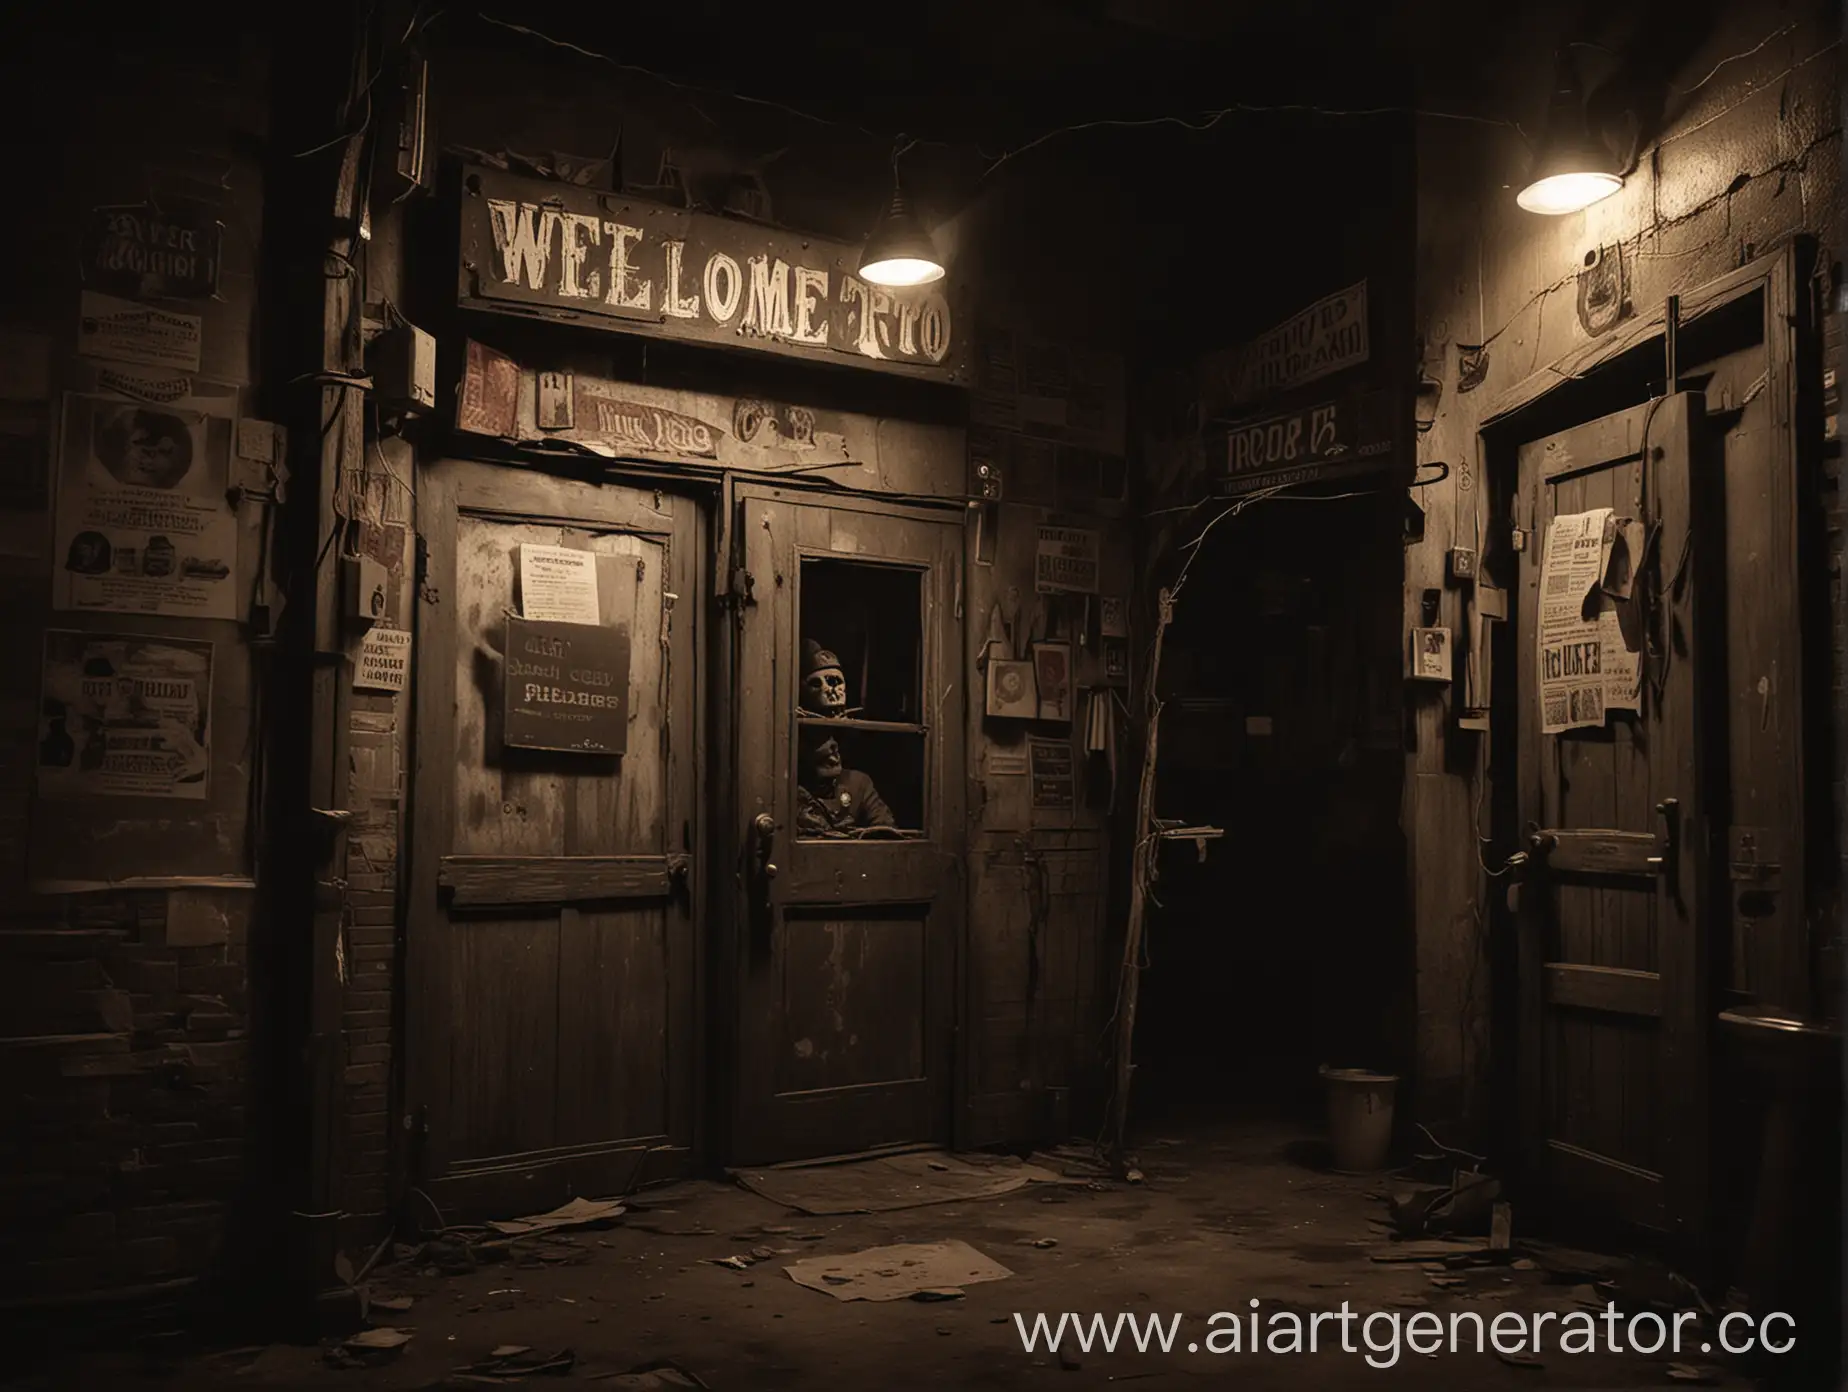 Create an illustration inspired by the song "Welcome to Freddy's," capturing the eerie and intense atmosphere of Five Nights at Freddy's. The scene should depict a new security guard in a haunted pizzeria, surrounded by animatronics that come to life at night. The background should be dark and ominous, with shadows and flickering lights to emphasize the fear and tension. The guard monitoring security cameras, showing different parts of the haunted pizzeria. The guard uncovering hidden truths, perhaps finding old photographs or newspaper clippings.